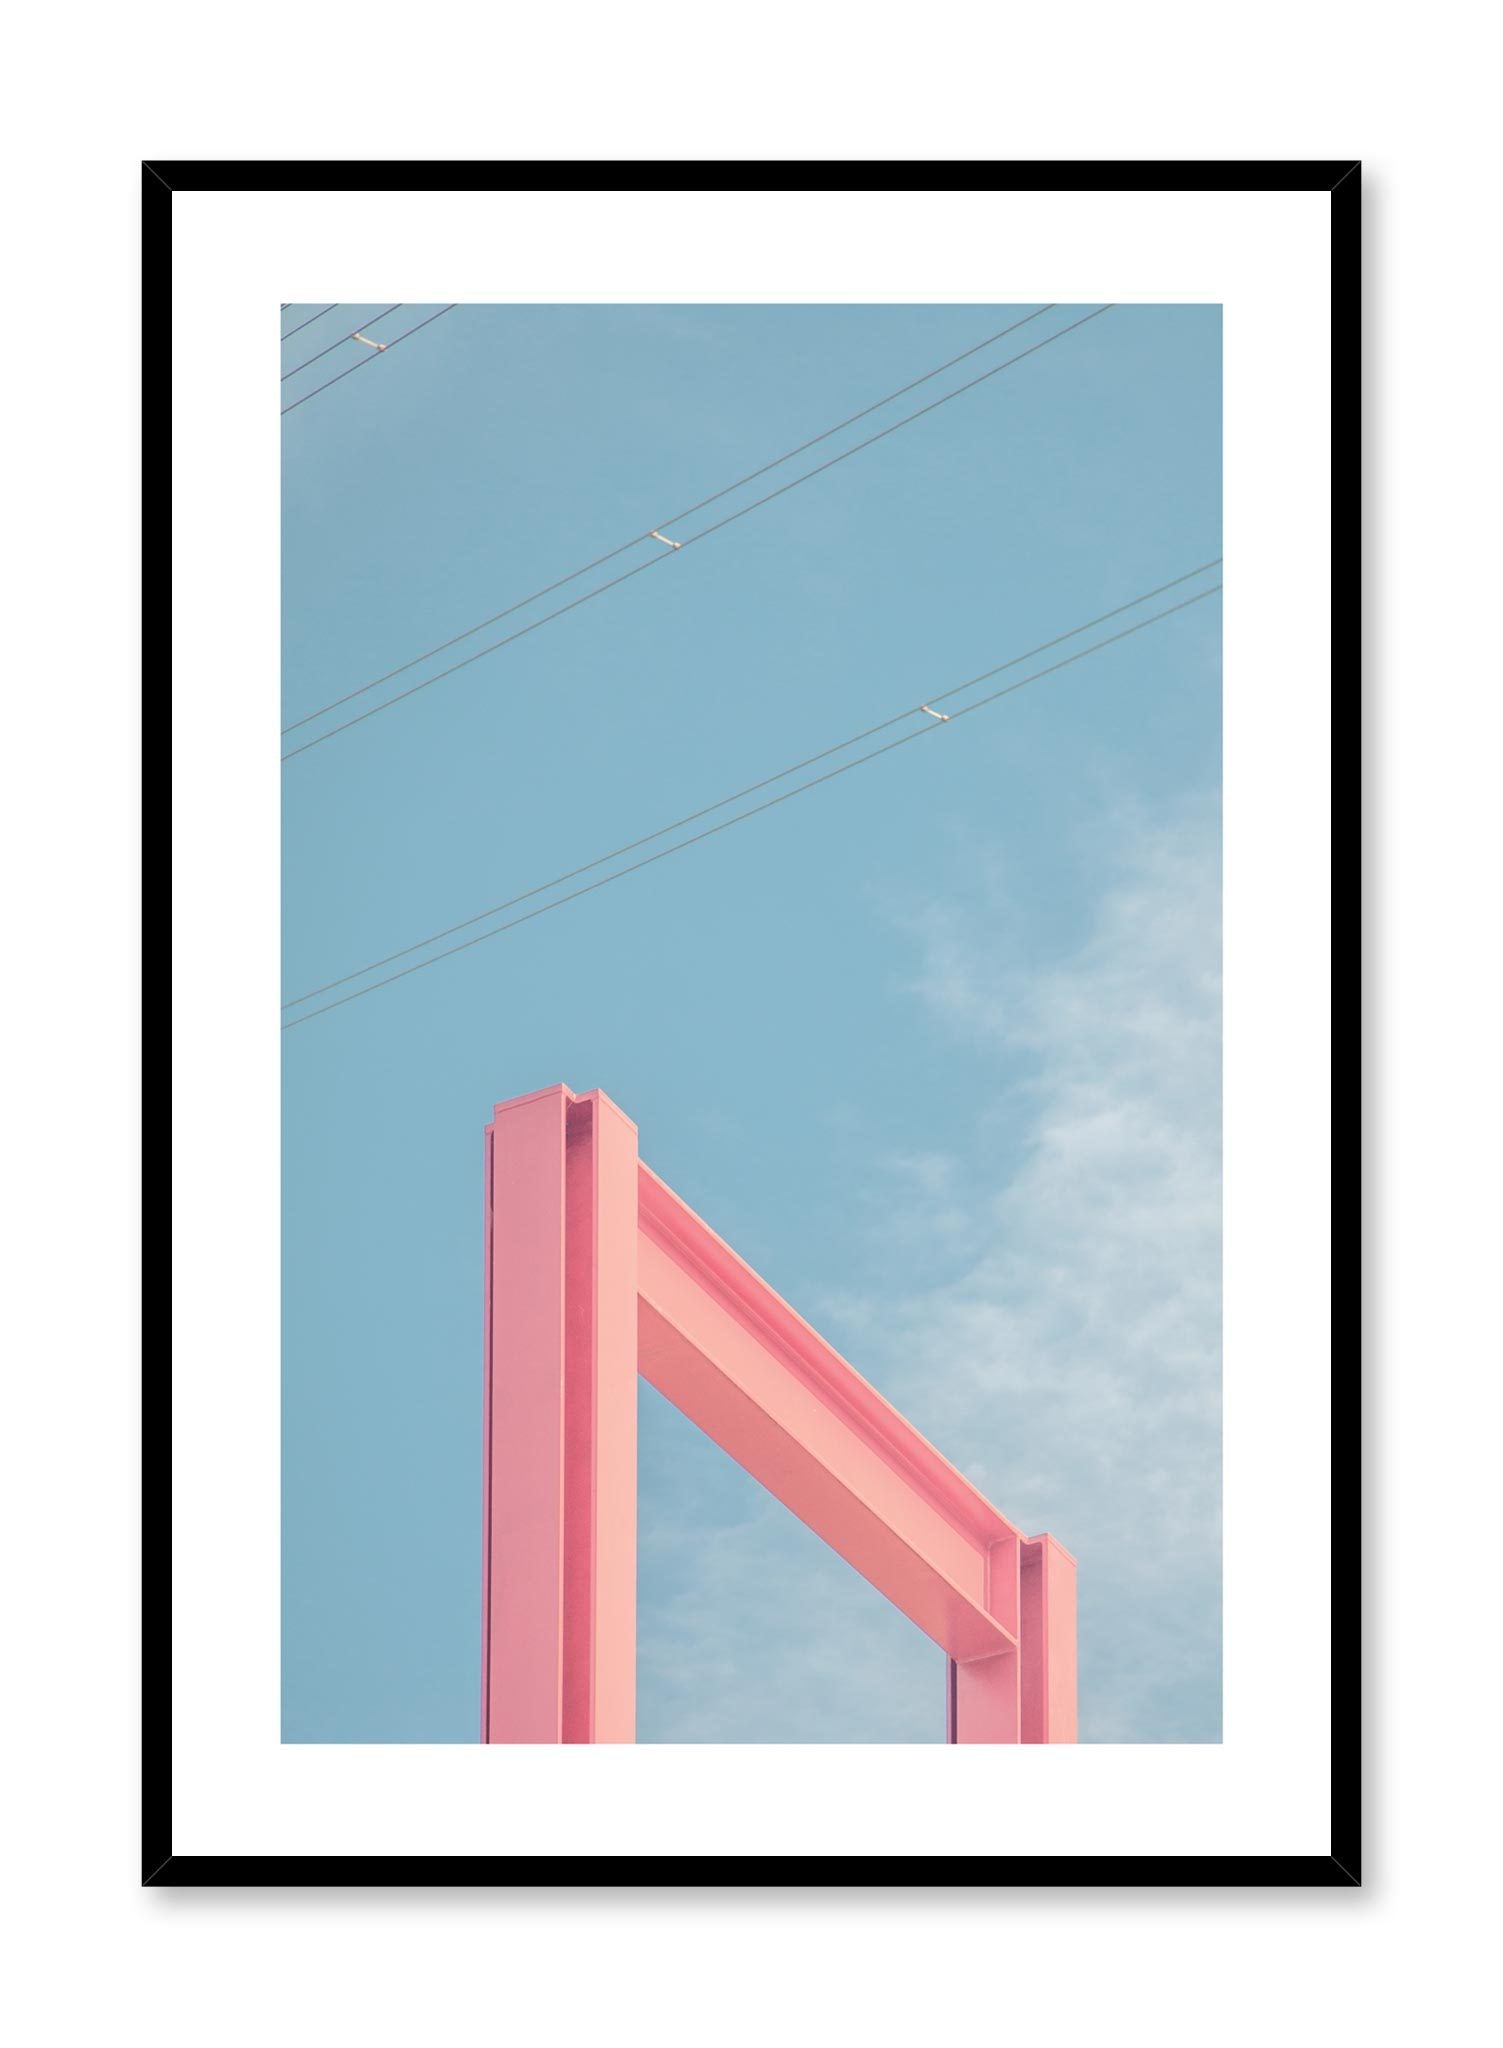 Minimalist design poster by Opposite Wall with urban photography of pink arch